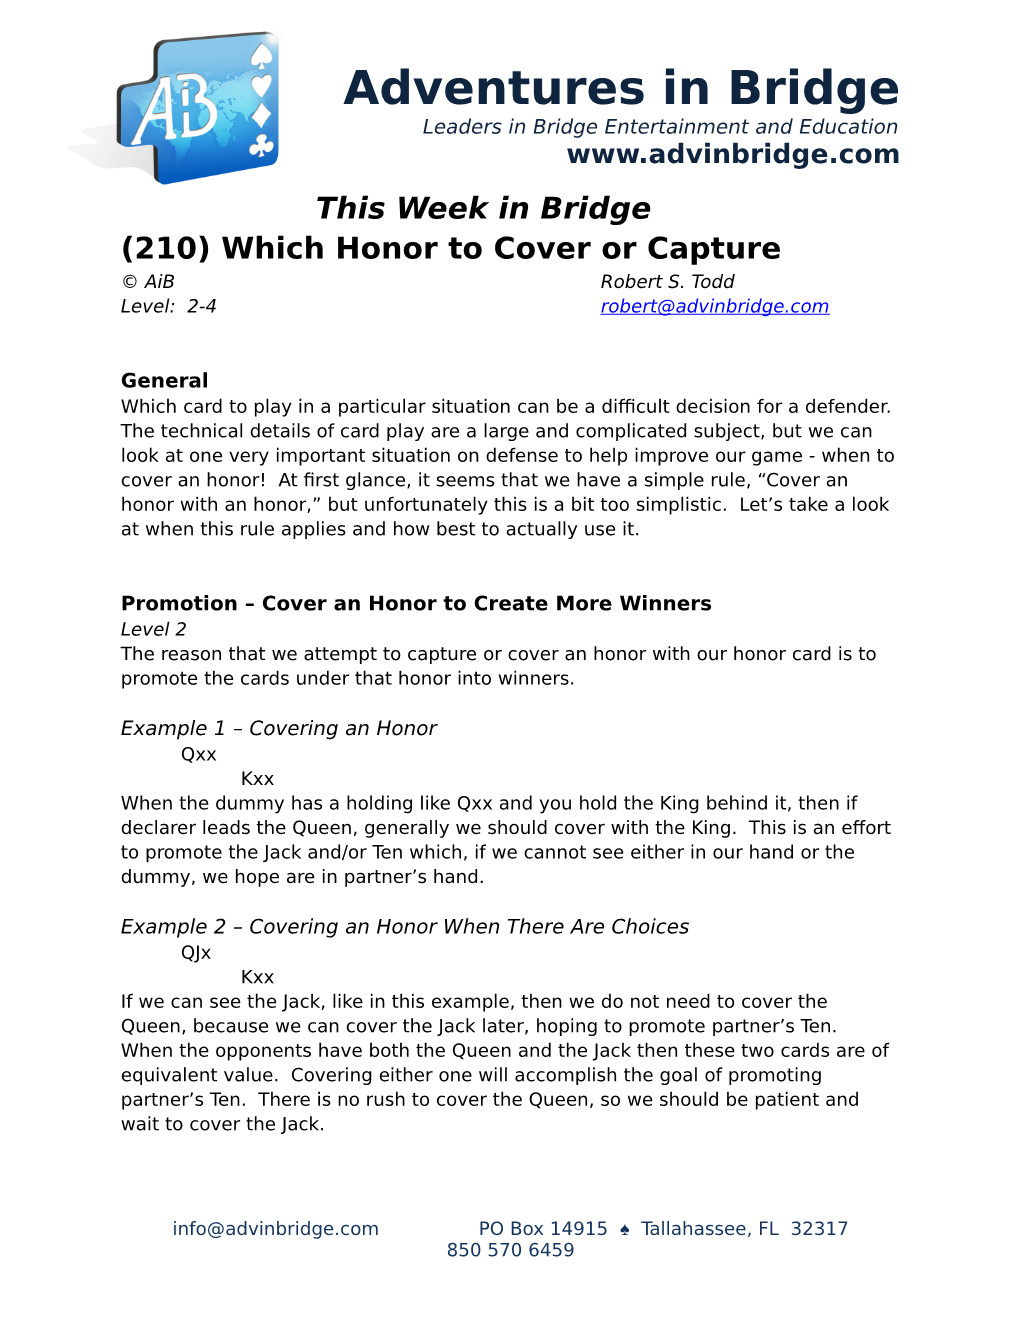 Adventures in Bridge Leaders in Bridge Entertainment and Education This Week in Bridge (210) Which Honor to Cover Or Capture © Aib Robert S